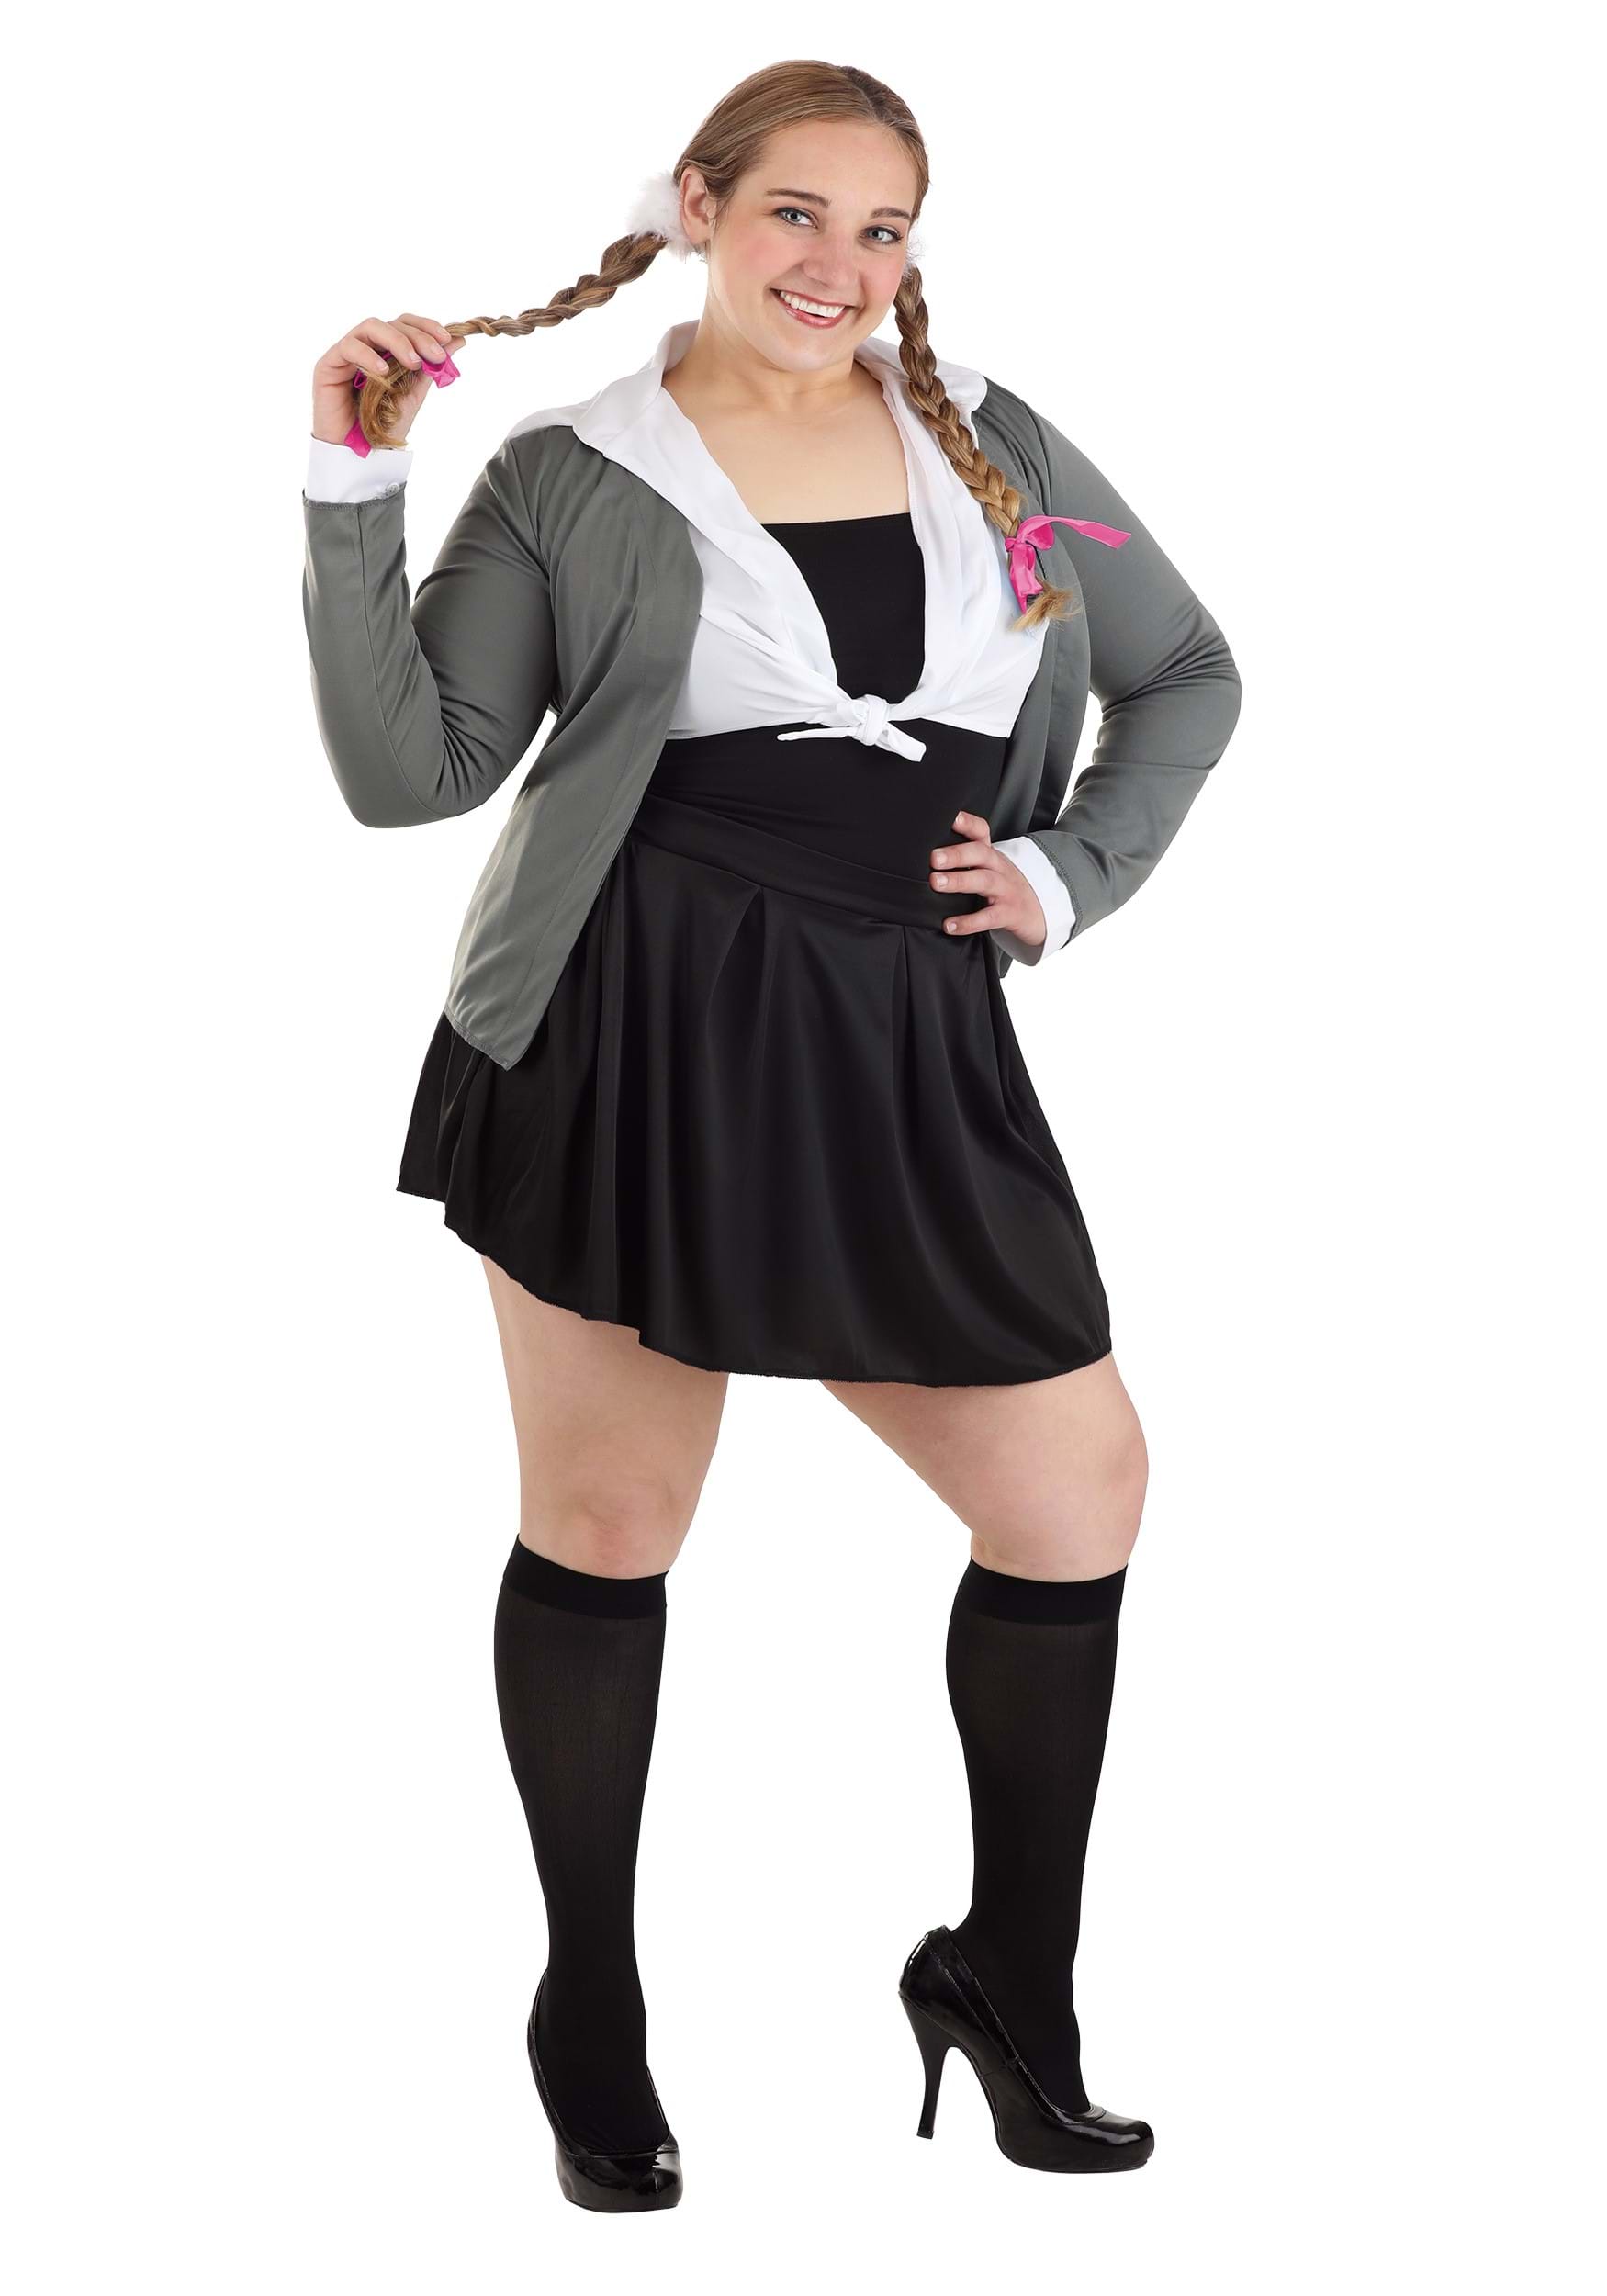 One More Time Pop Singer Women's Costume